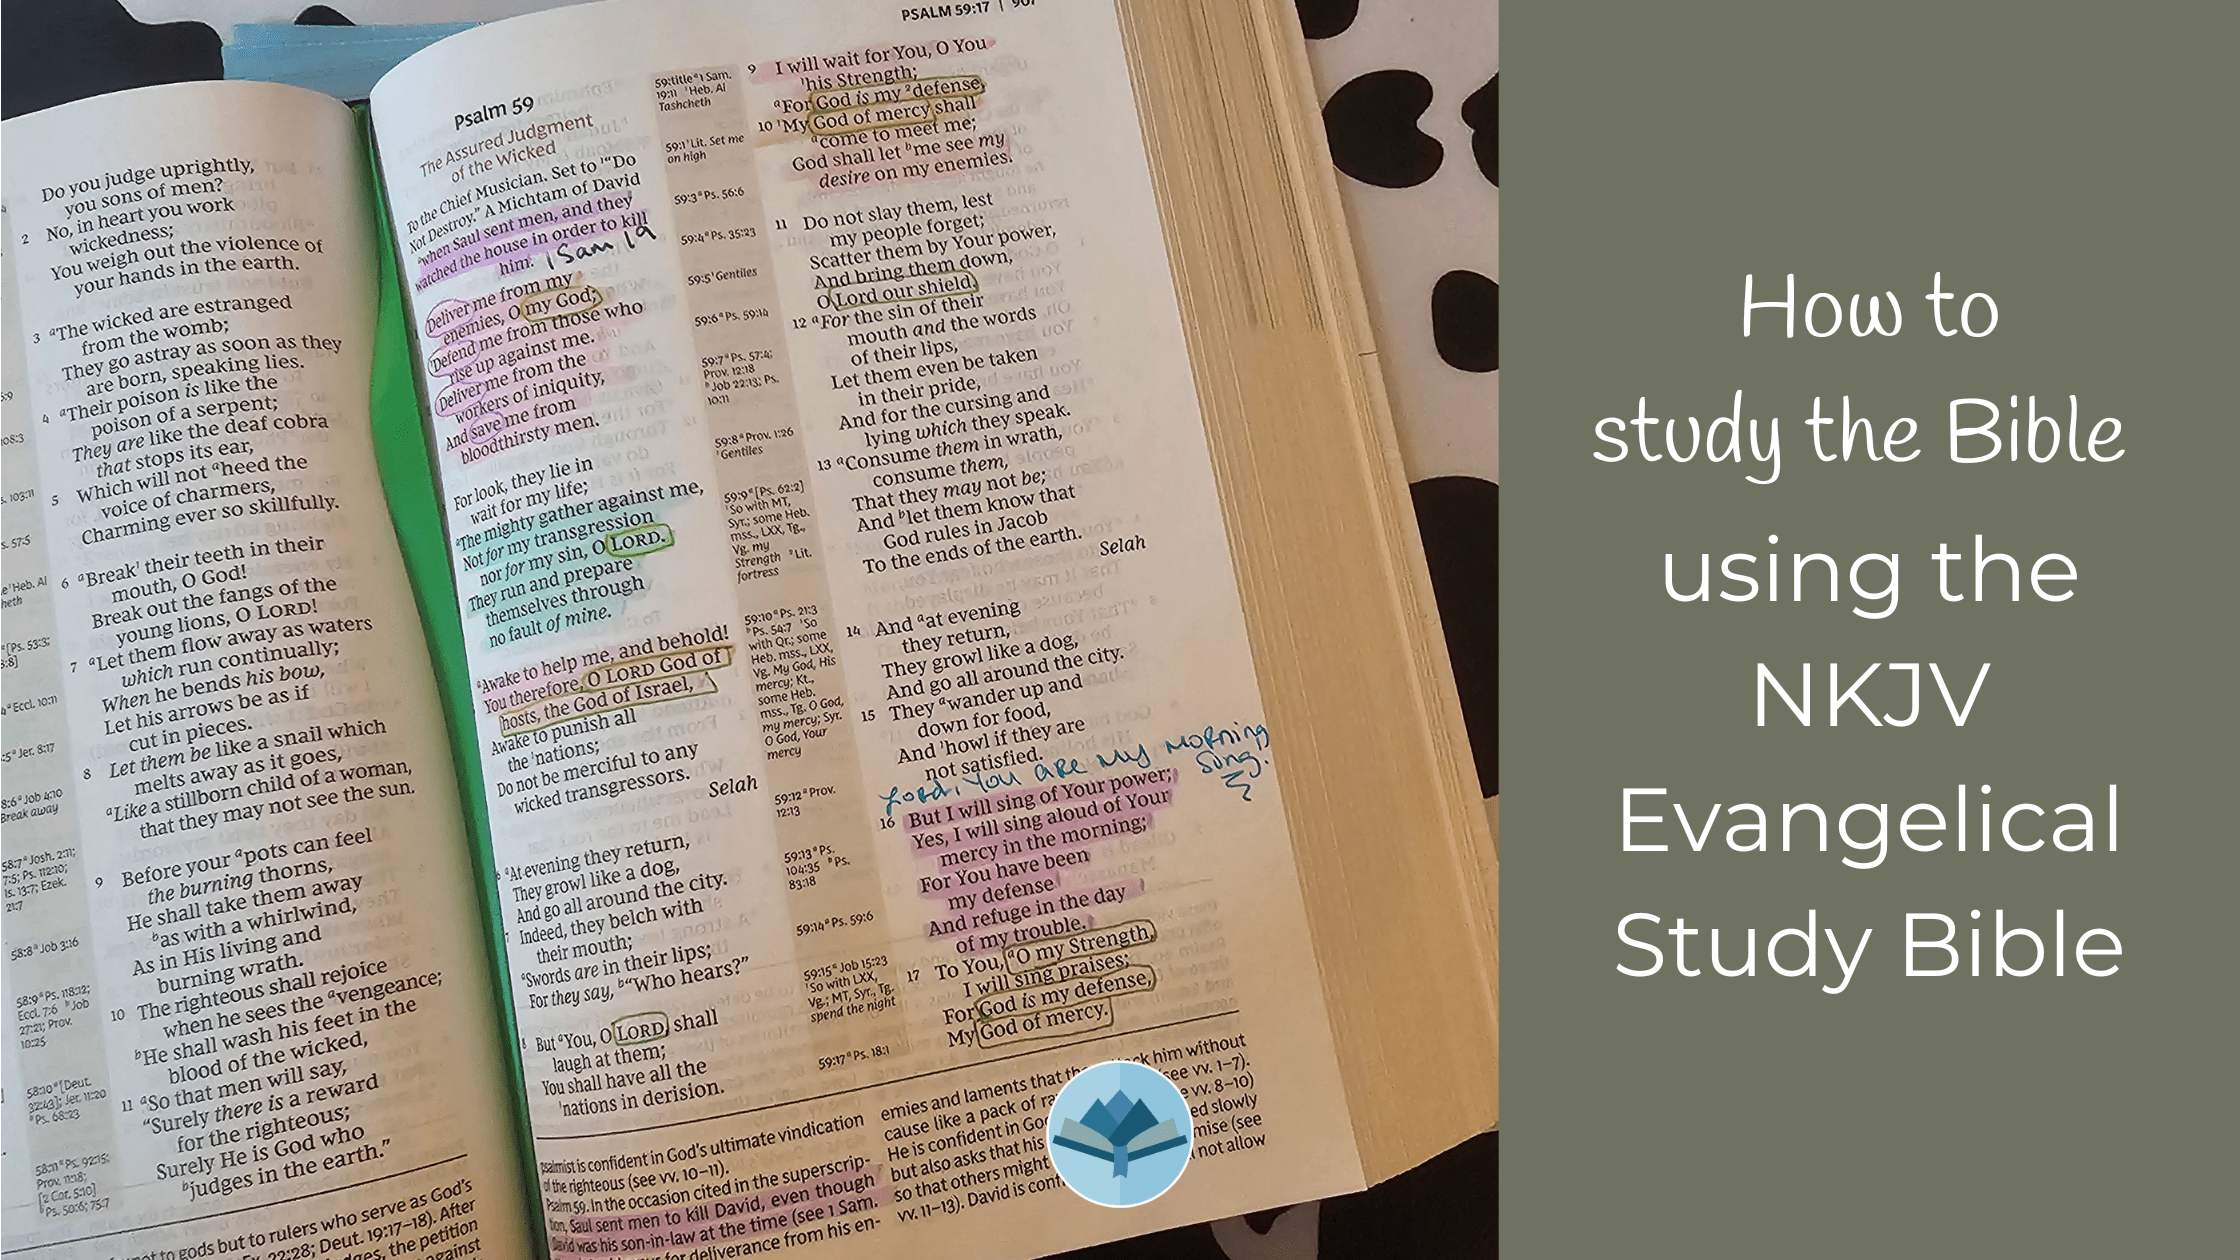 How to study the Bible using the Evangelical Study Bible